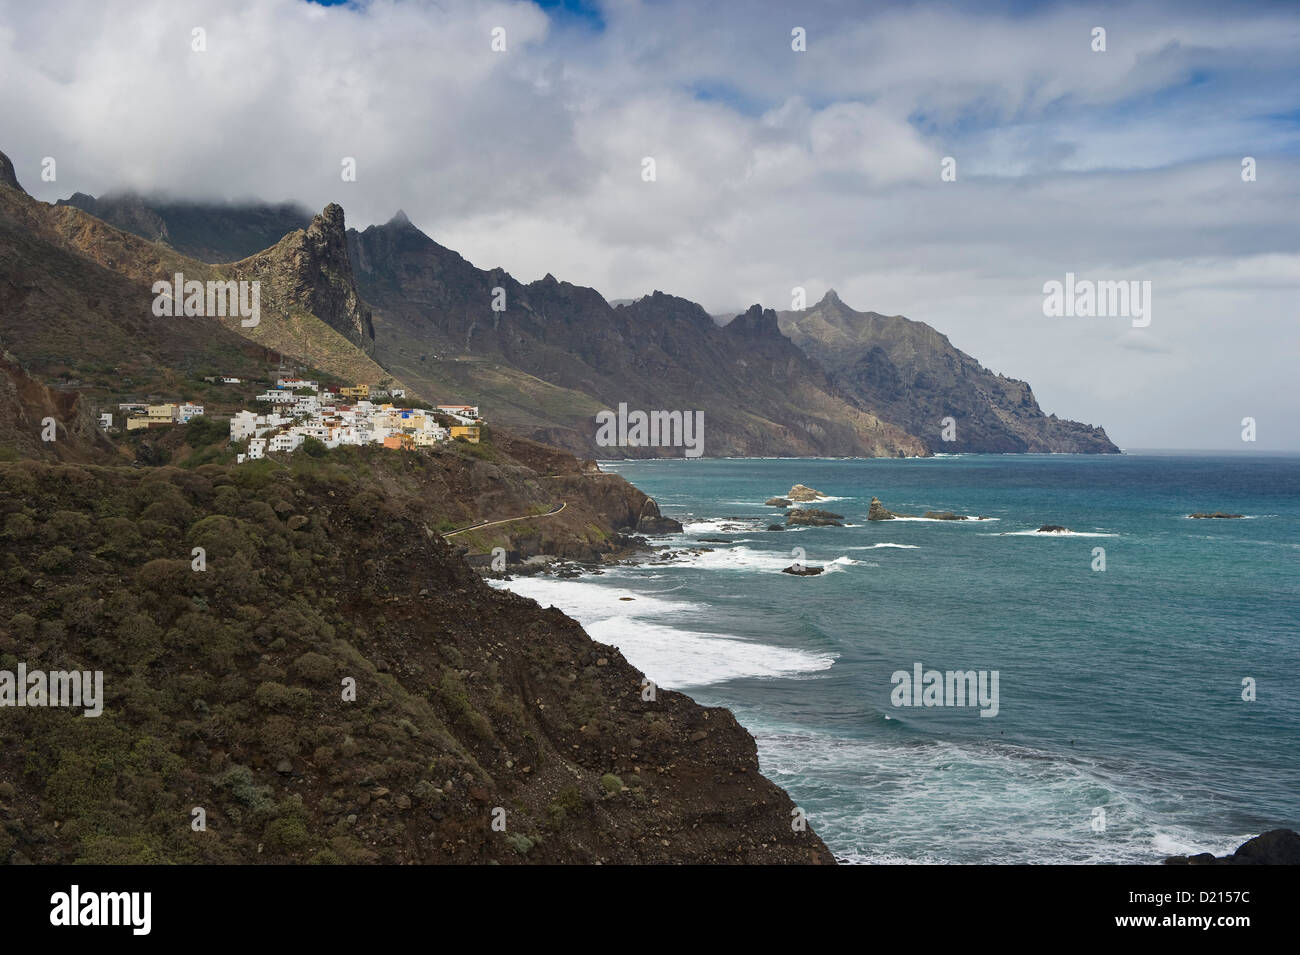 The village of Taganana in the Anaga mountains, Tenerife, Canary Islands, Spain, Europe Stock Photo